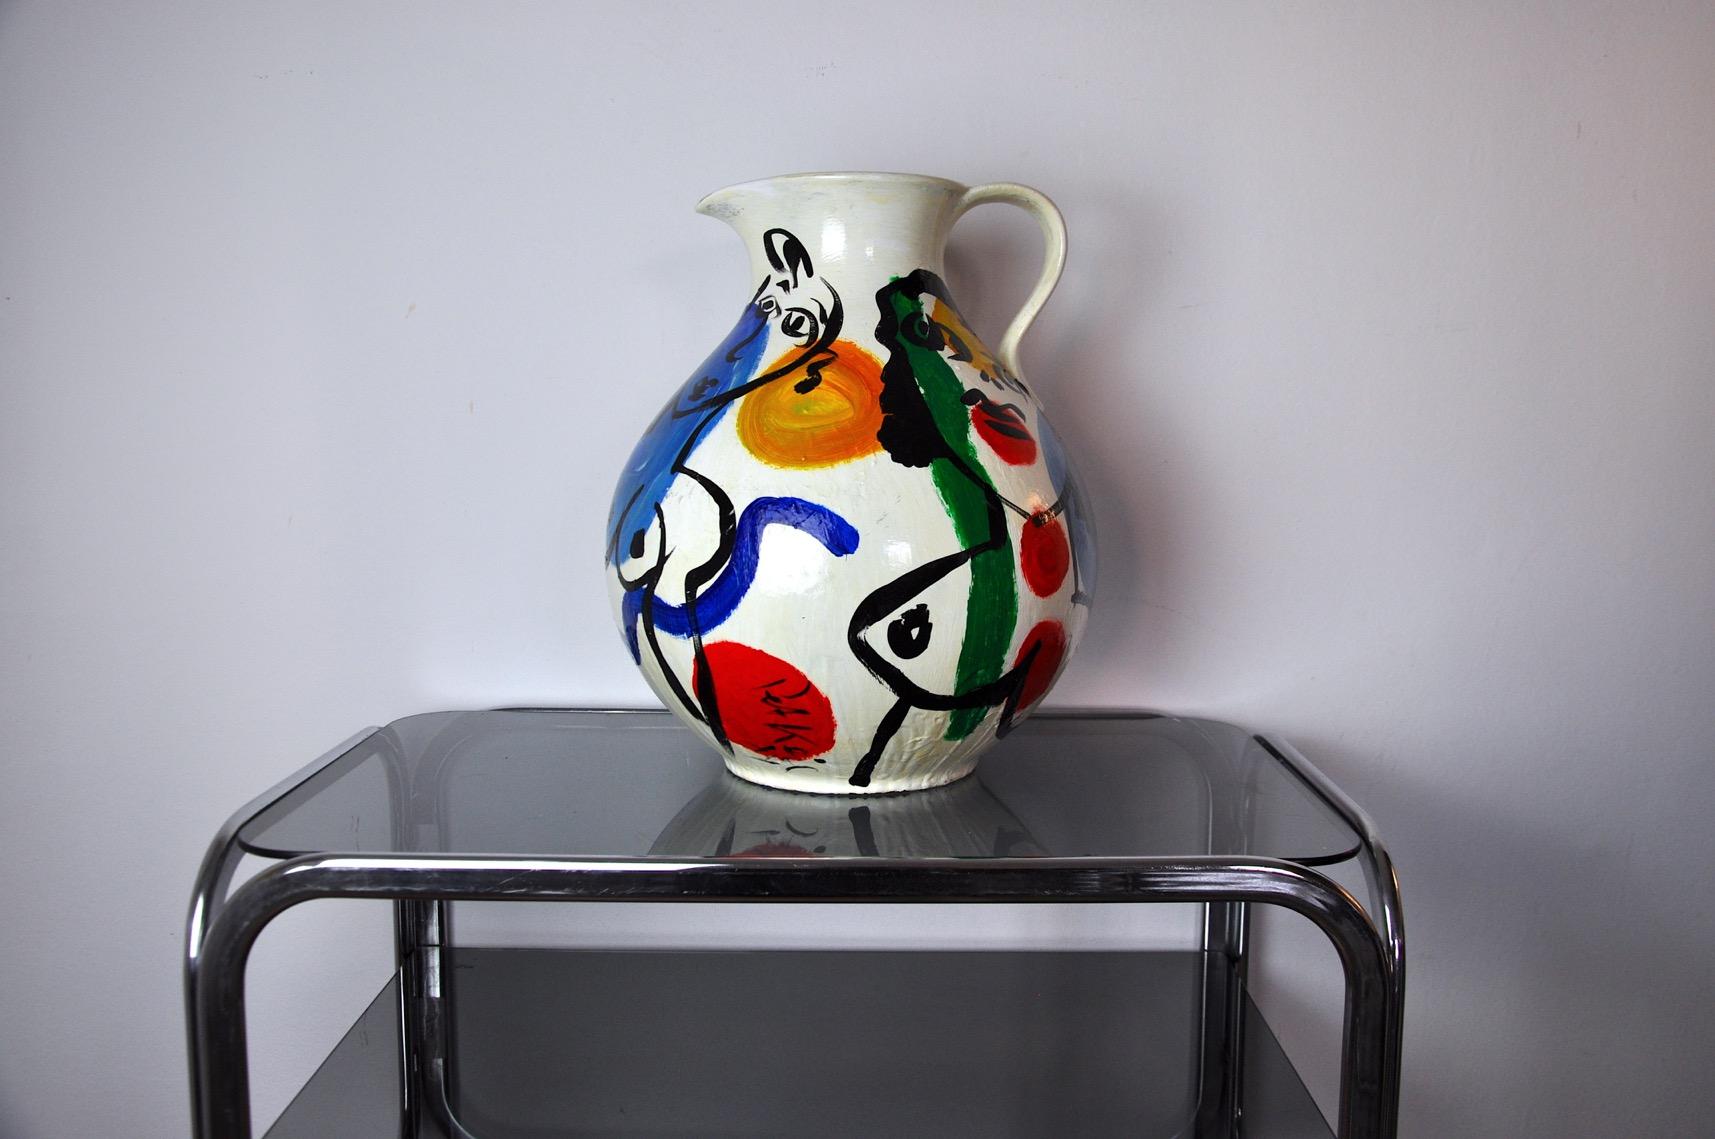 Superb and large abstract vase painted by the German artist peter robert keil in 1984. This vase is in perfect condition and its dimensions make it truly unique. Peter robert keil is a contemporary painter recognized in germany for his dynamic forms